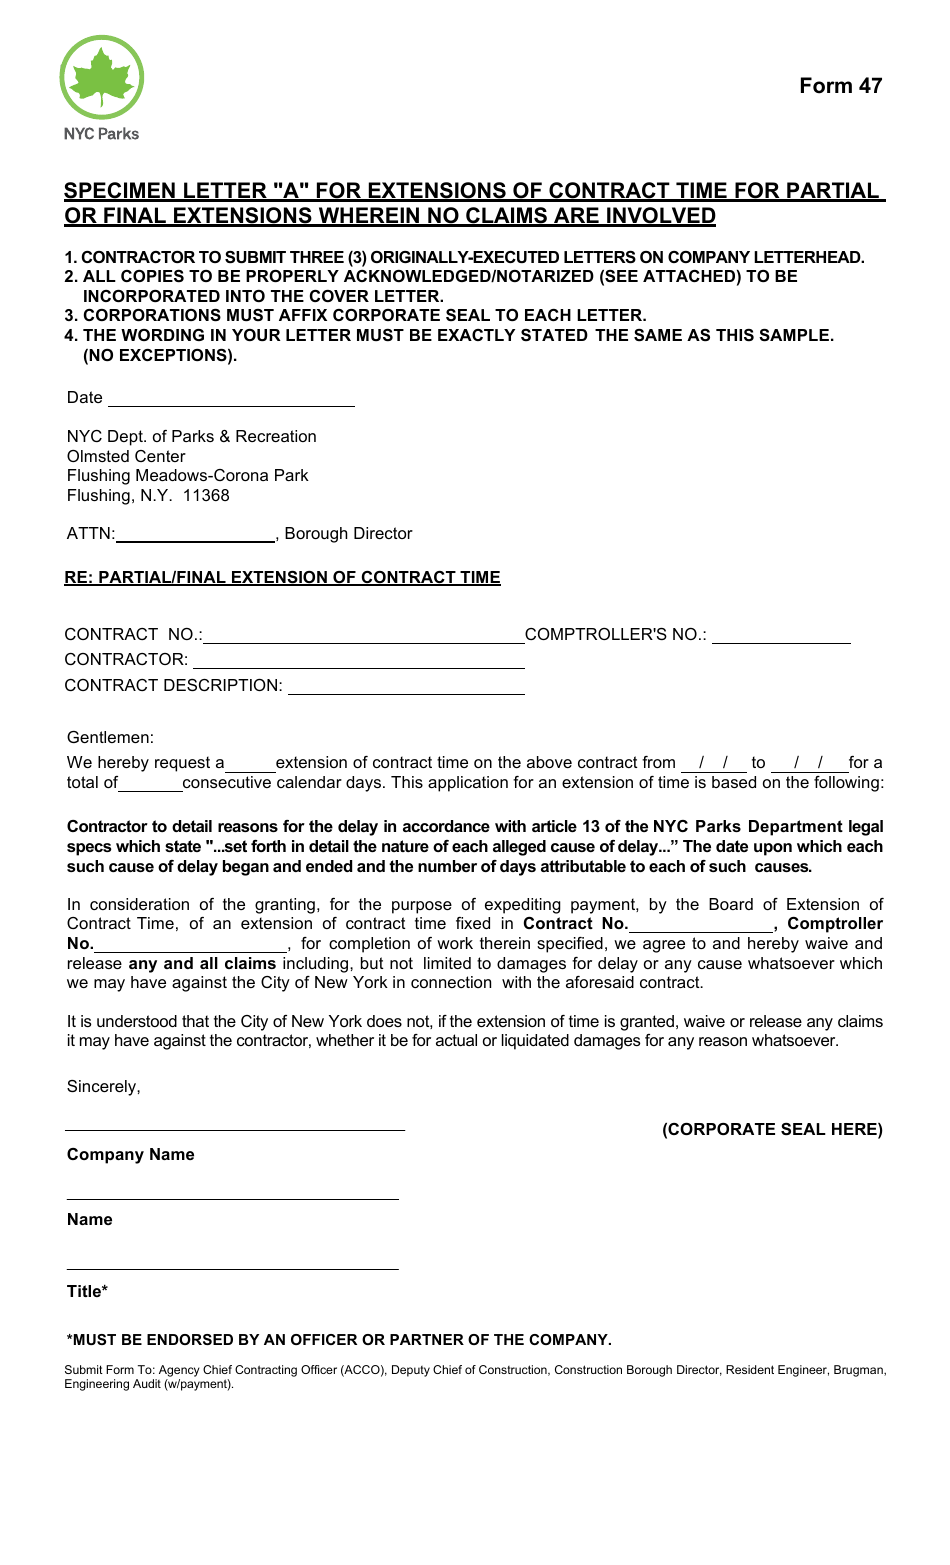 Form 47 Specimen Letter a for Extensions of Contract Time for Partial or Final Extensions Wherein No Claims Are Involved - New York City, Page 1